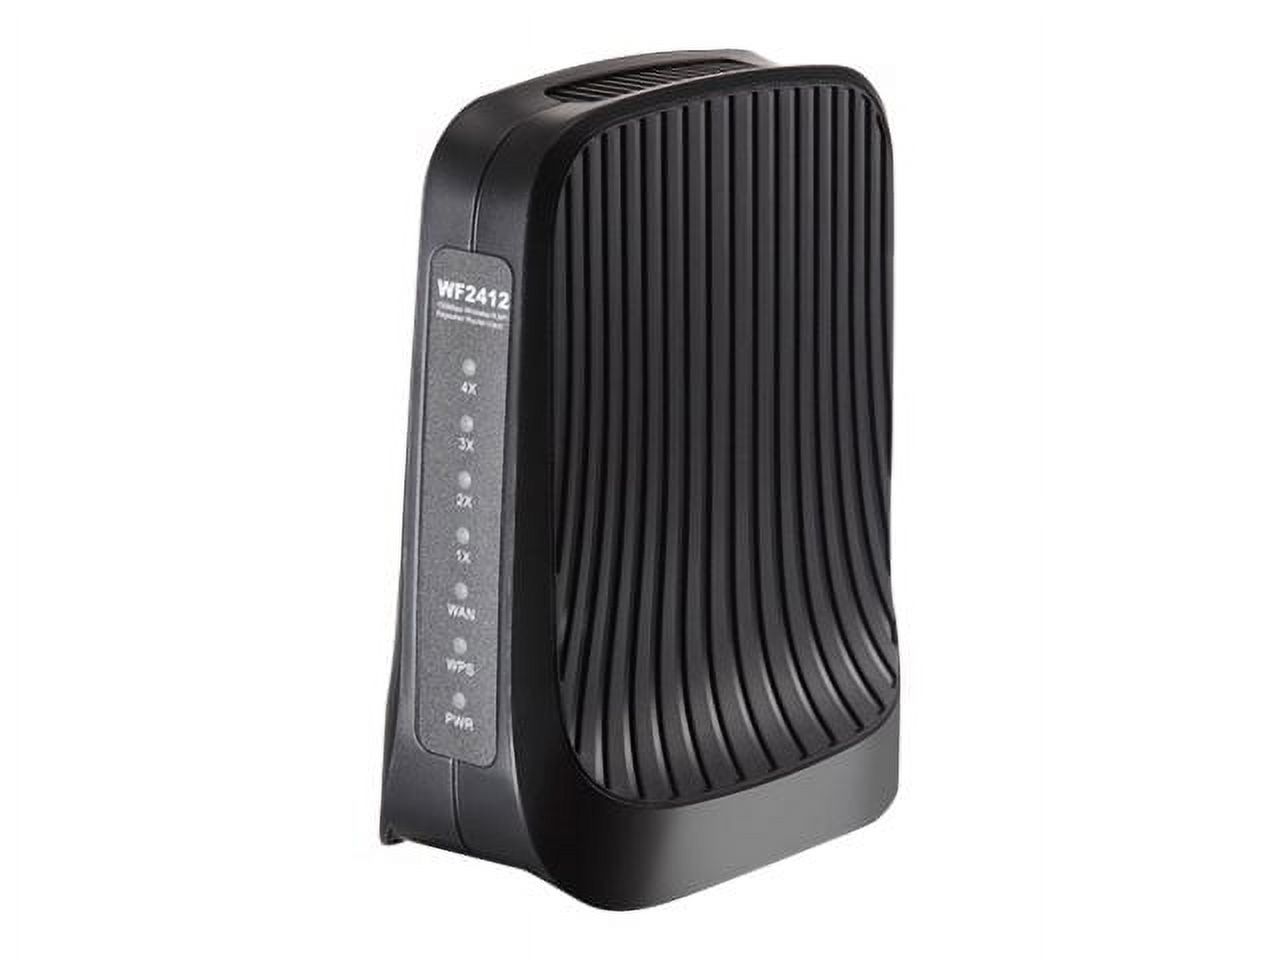 Netis WF2412 - Wireless router - 4-port switch - Wi-Fi - 2.4 GHz - image 1 of 6